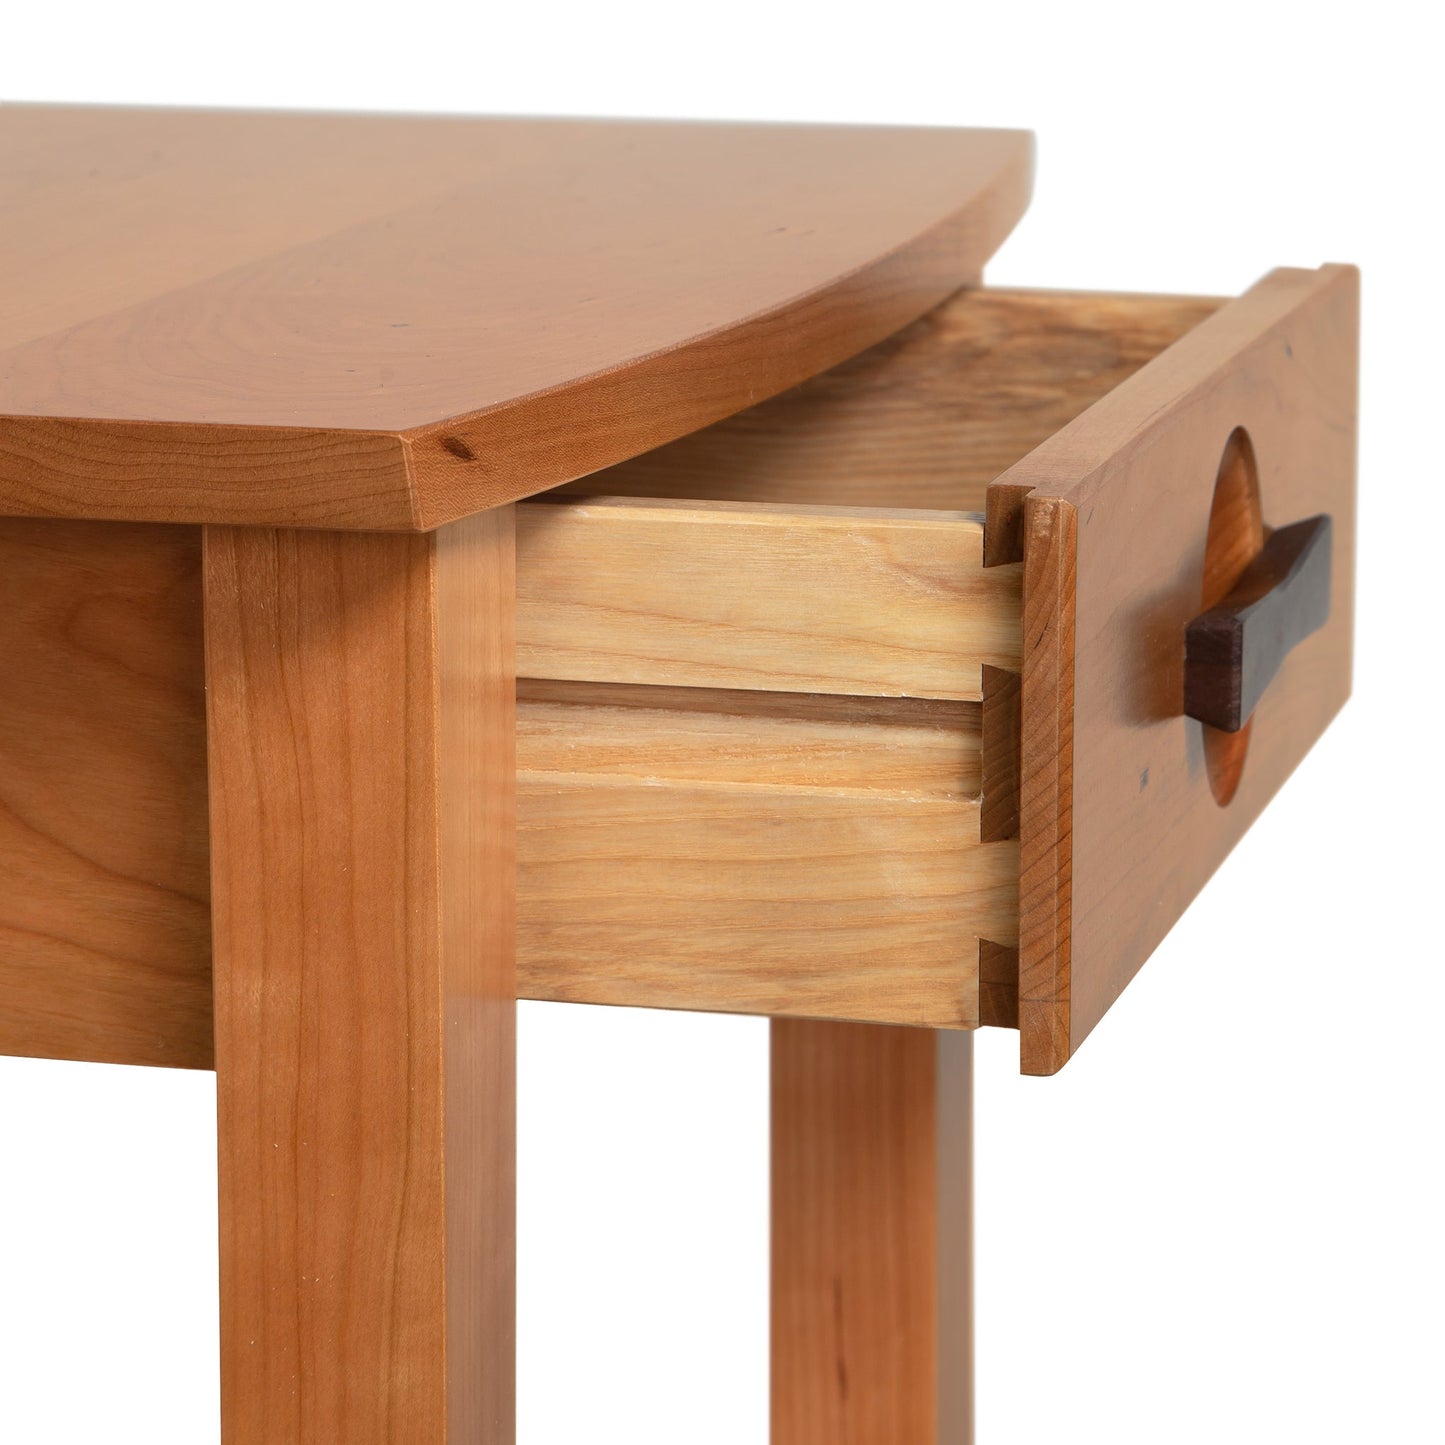 A wooden table with a drawer in it.